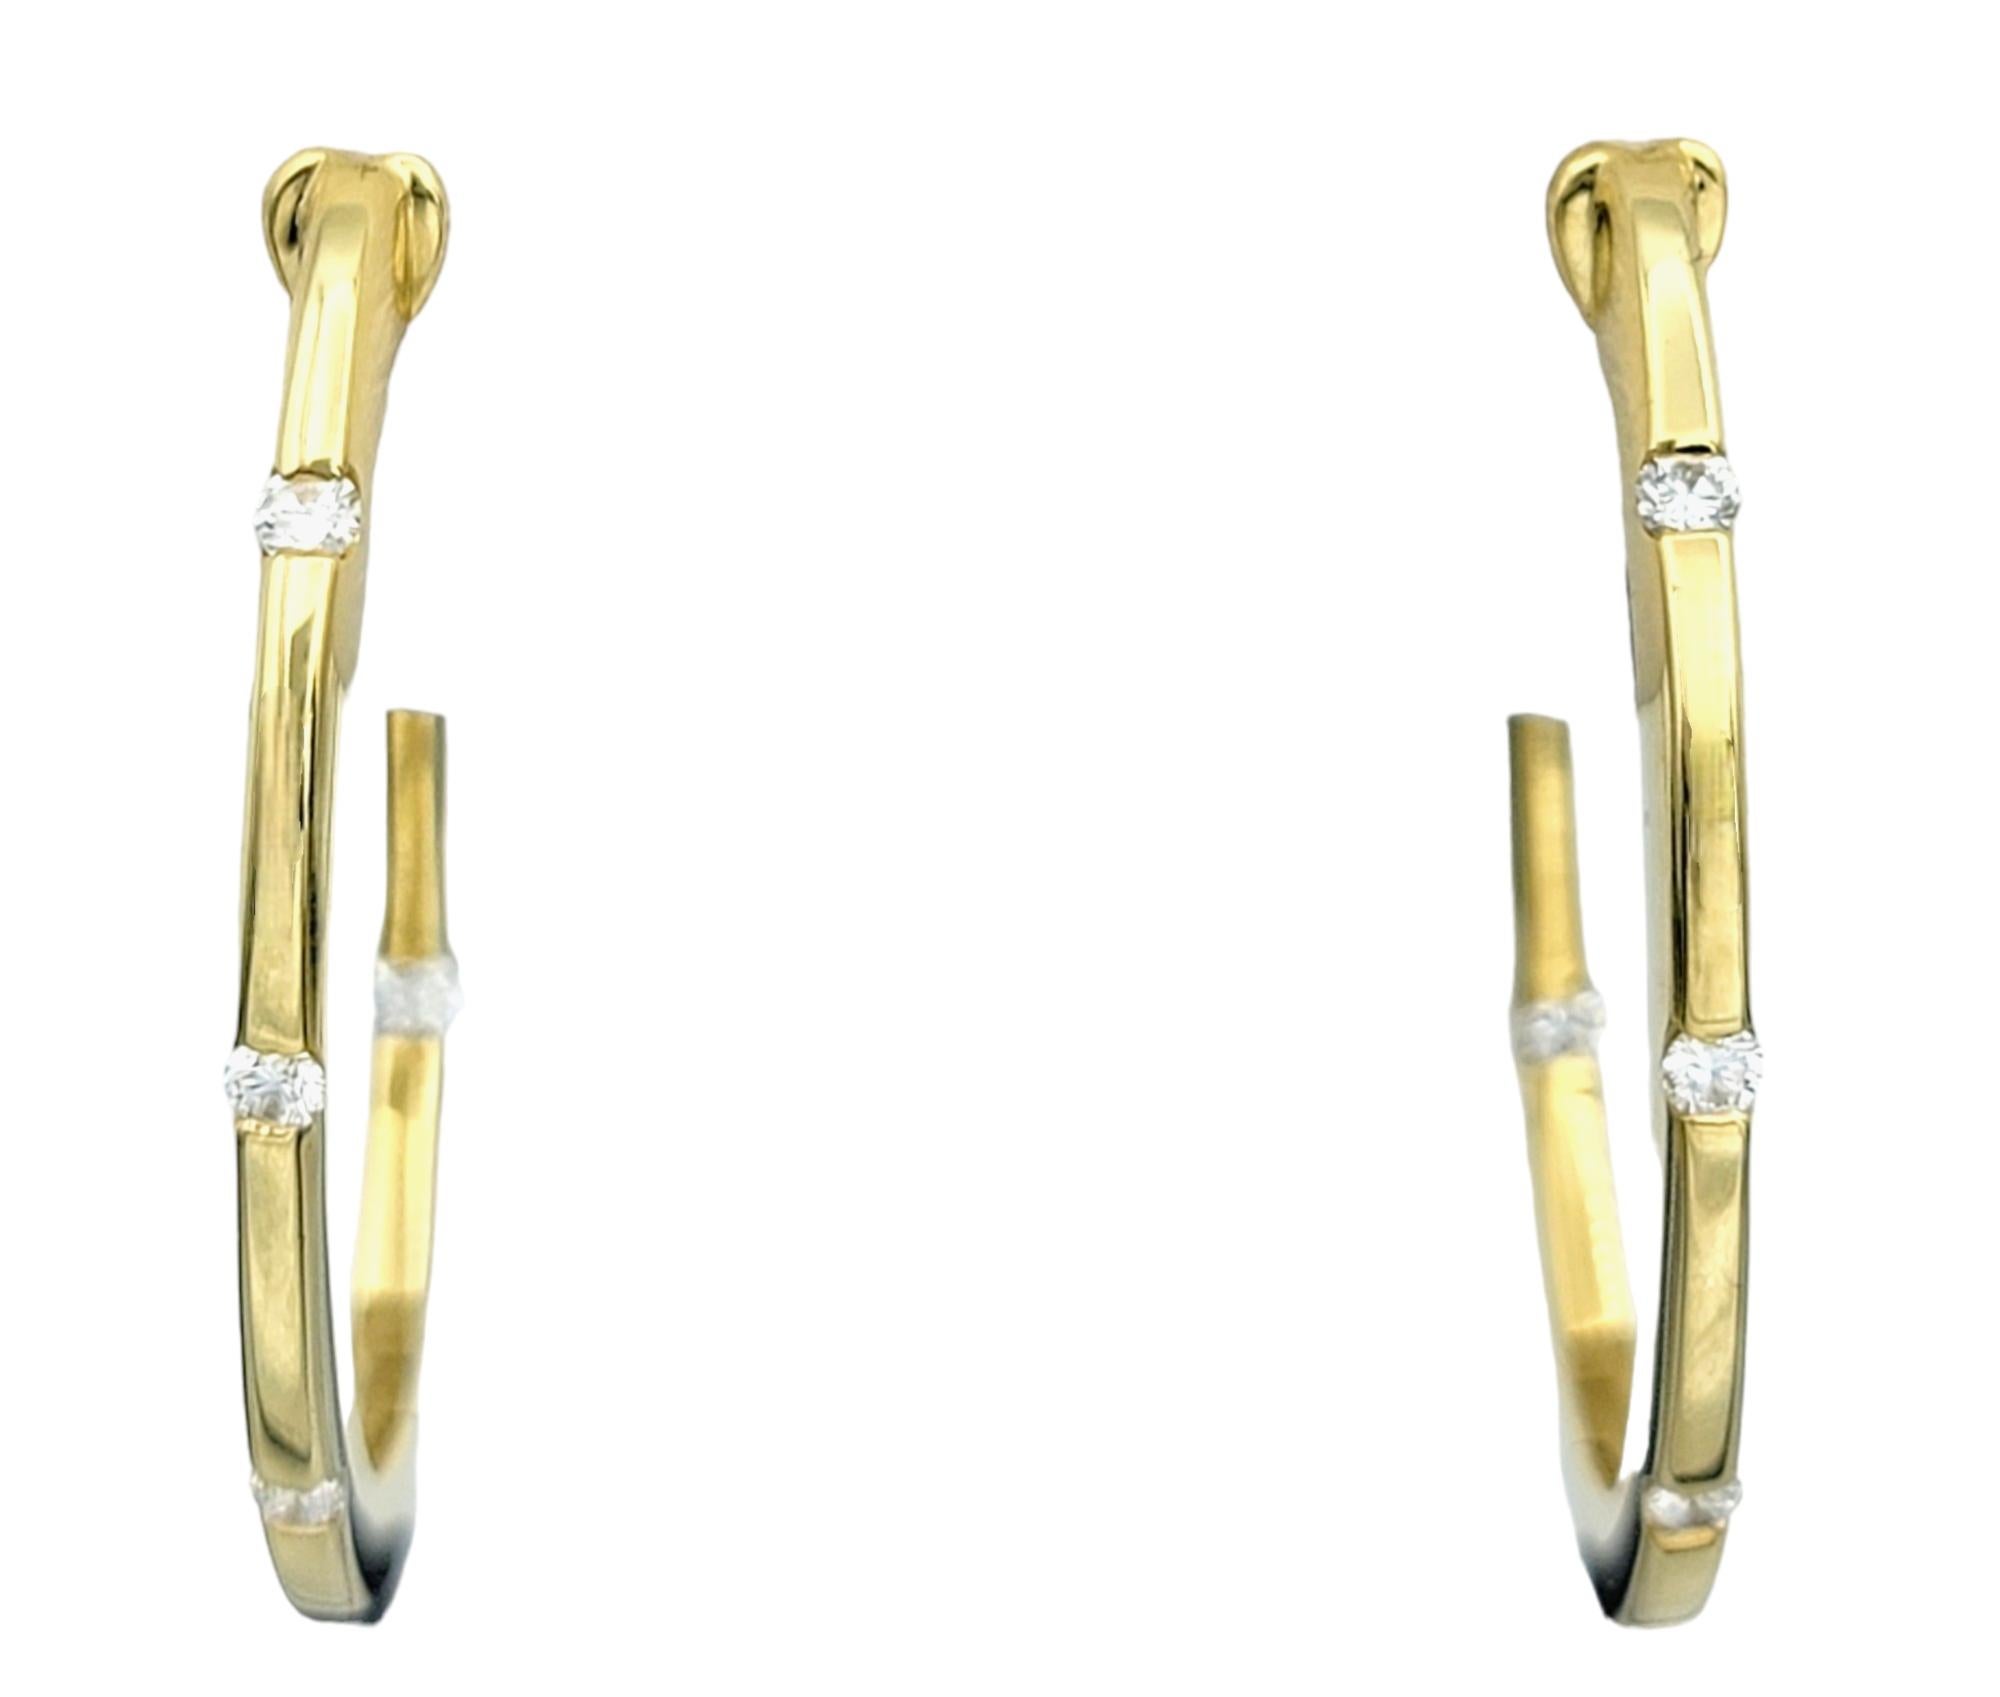 These stunning hoop earrings from Roberto Coin, crafted from luxurious 18 karat yellow gold, boast a timeless design adorned with dazzling diamonds, adding a touch of sophistication to any ensemble. The brilliance of the diamonds is perfectly